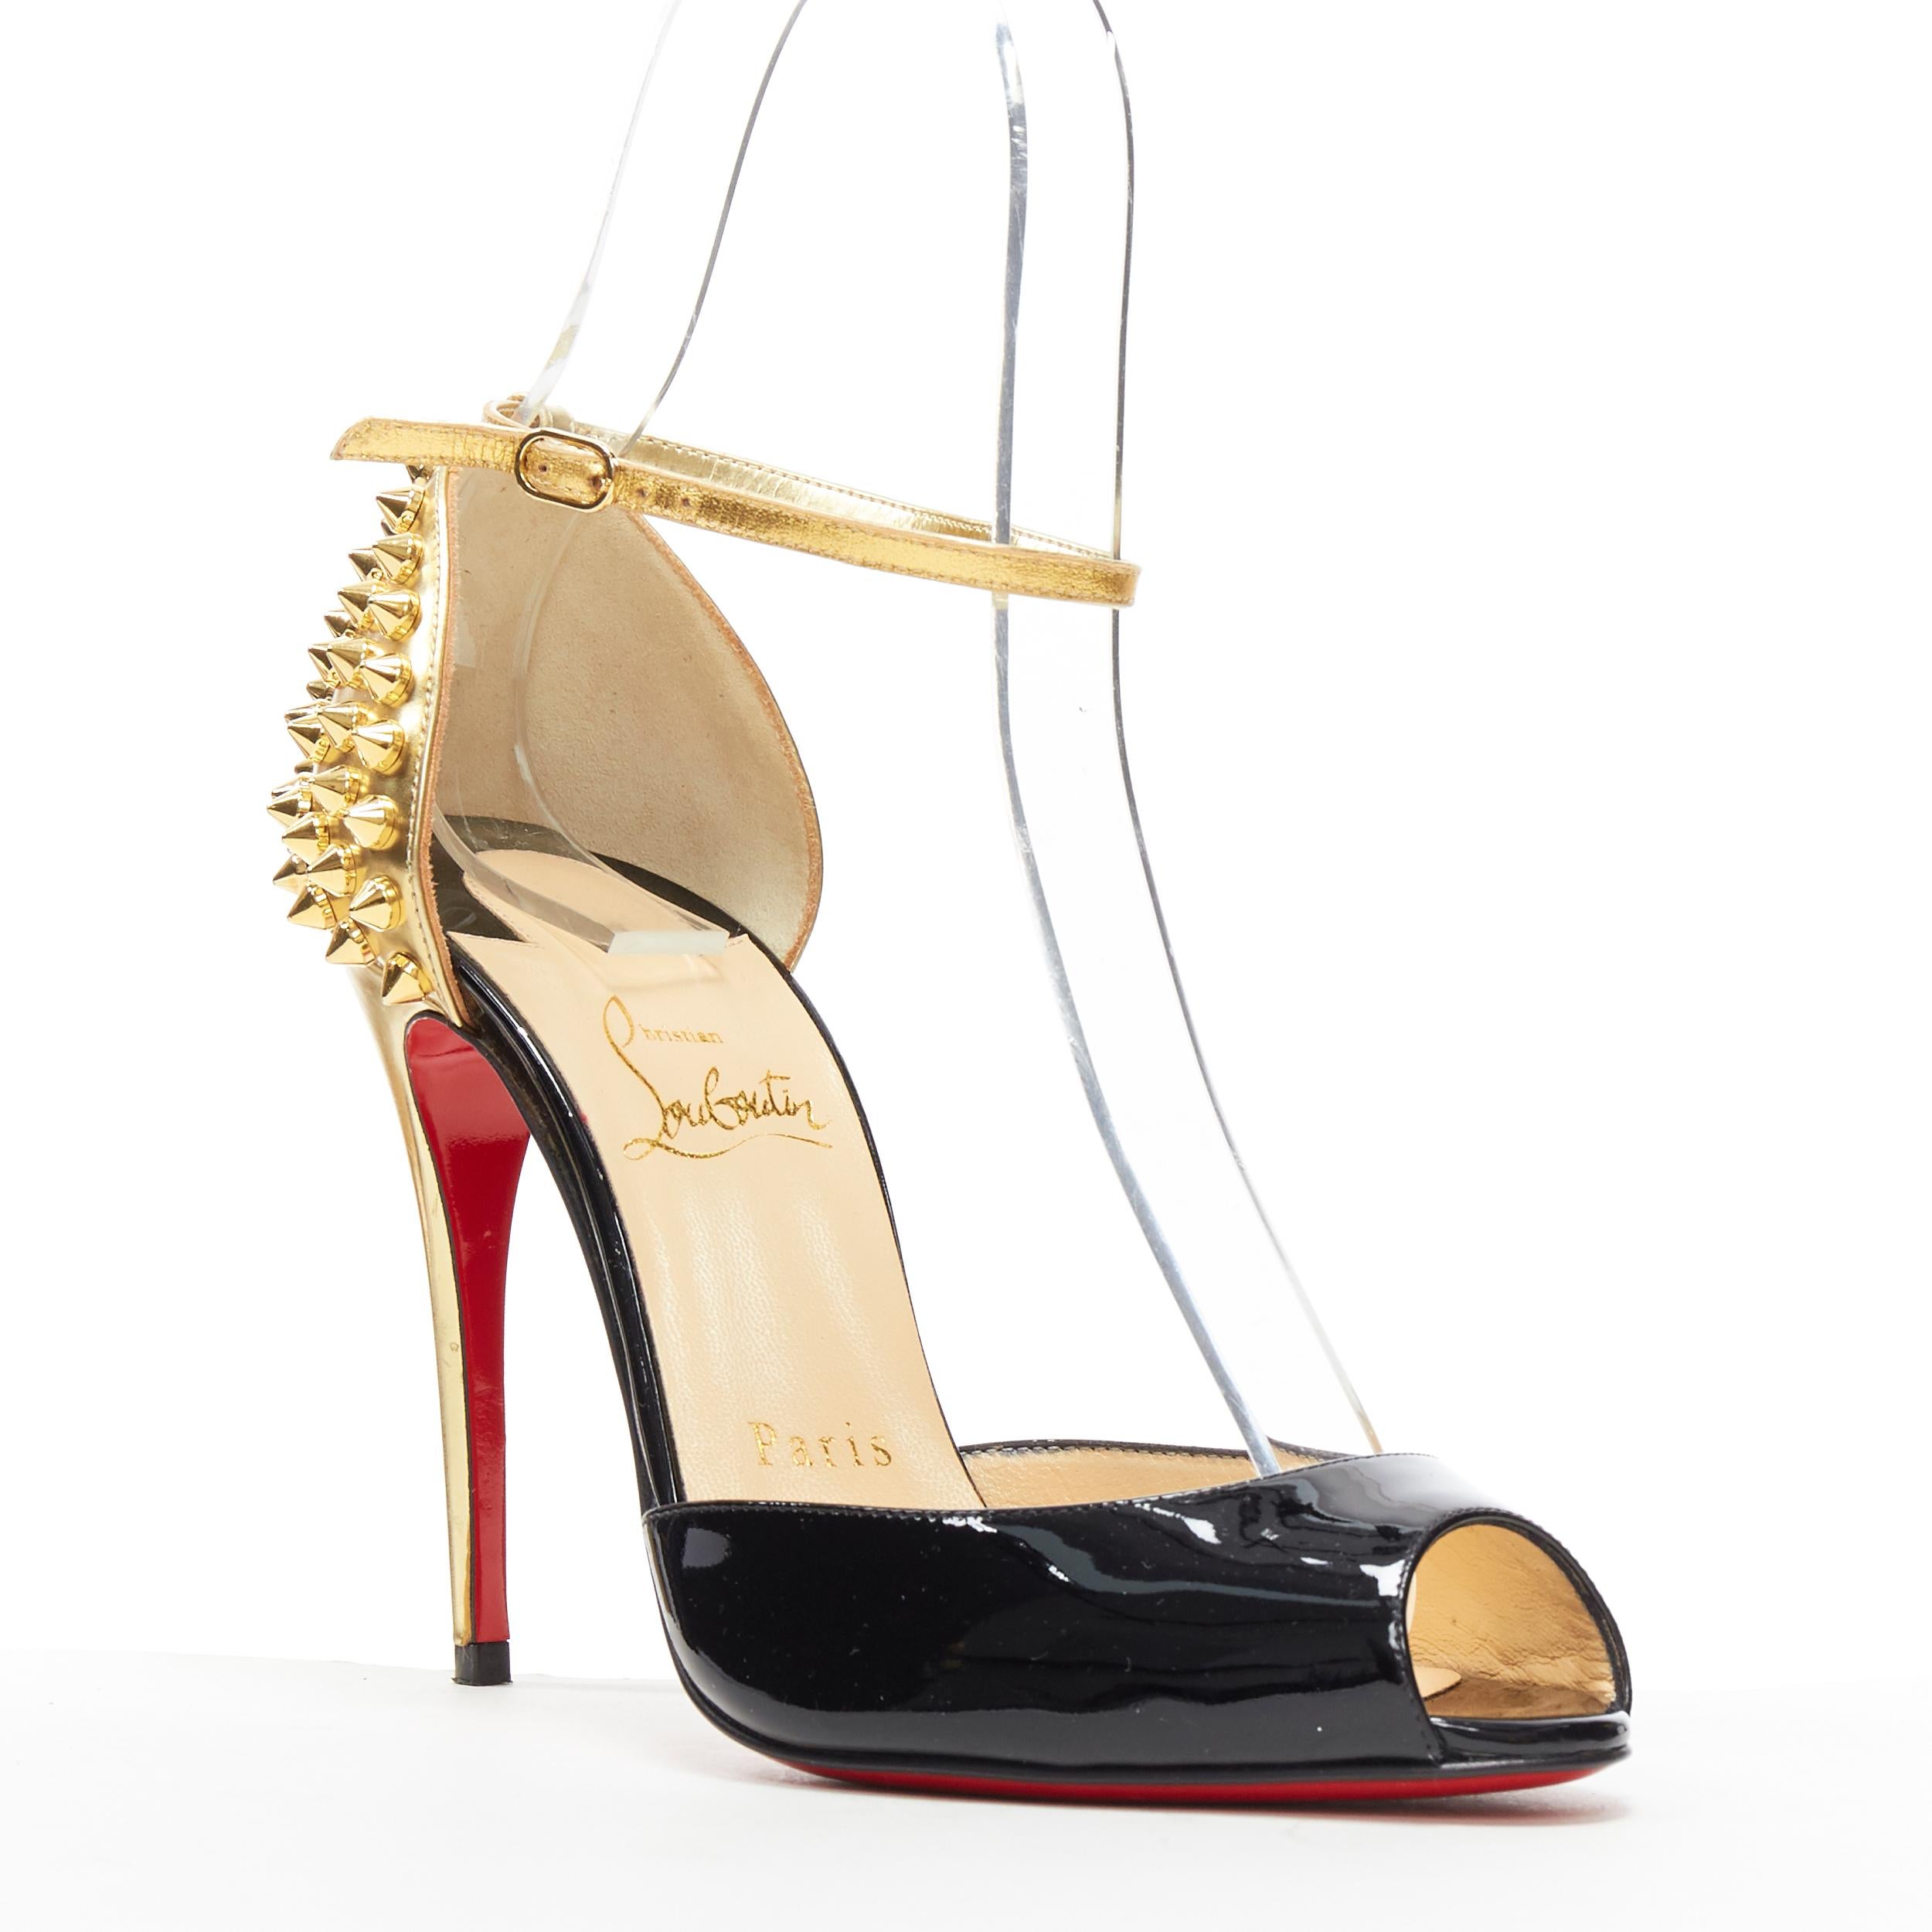 CHRISTIAN LOUBOUTIN Pina Spike black patent gold studded peep toe sandals EU36.5
Brand: Christian Louboutin
Designer: Christian Louboutin
Model Name / Style: Pina Spike
Material: Patent leather
Color: Black, gold
Pattern: Solid
Closure: Ankle